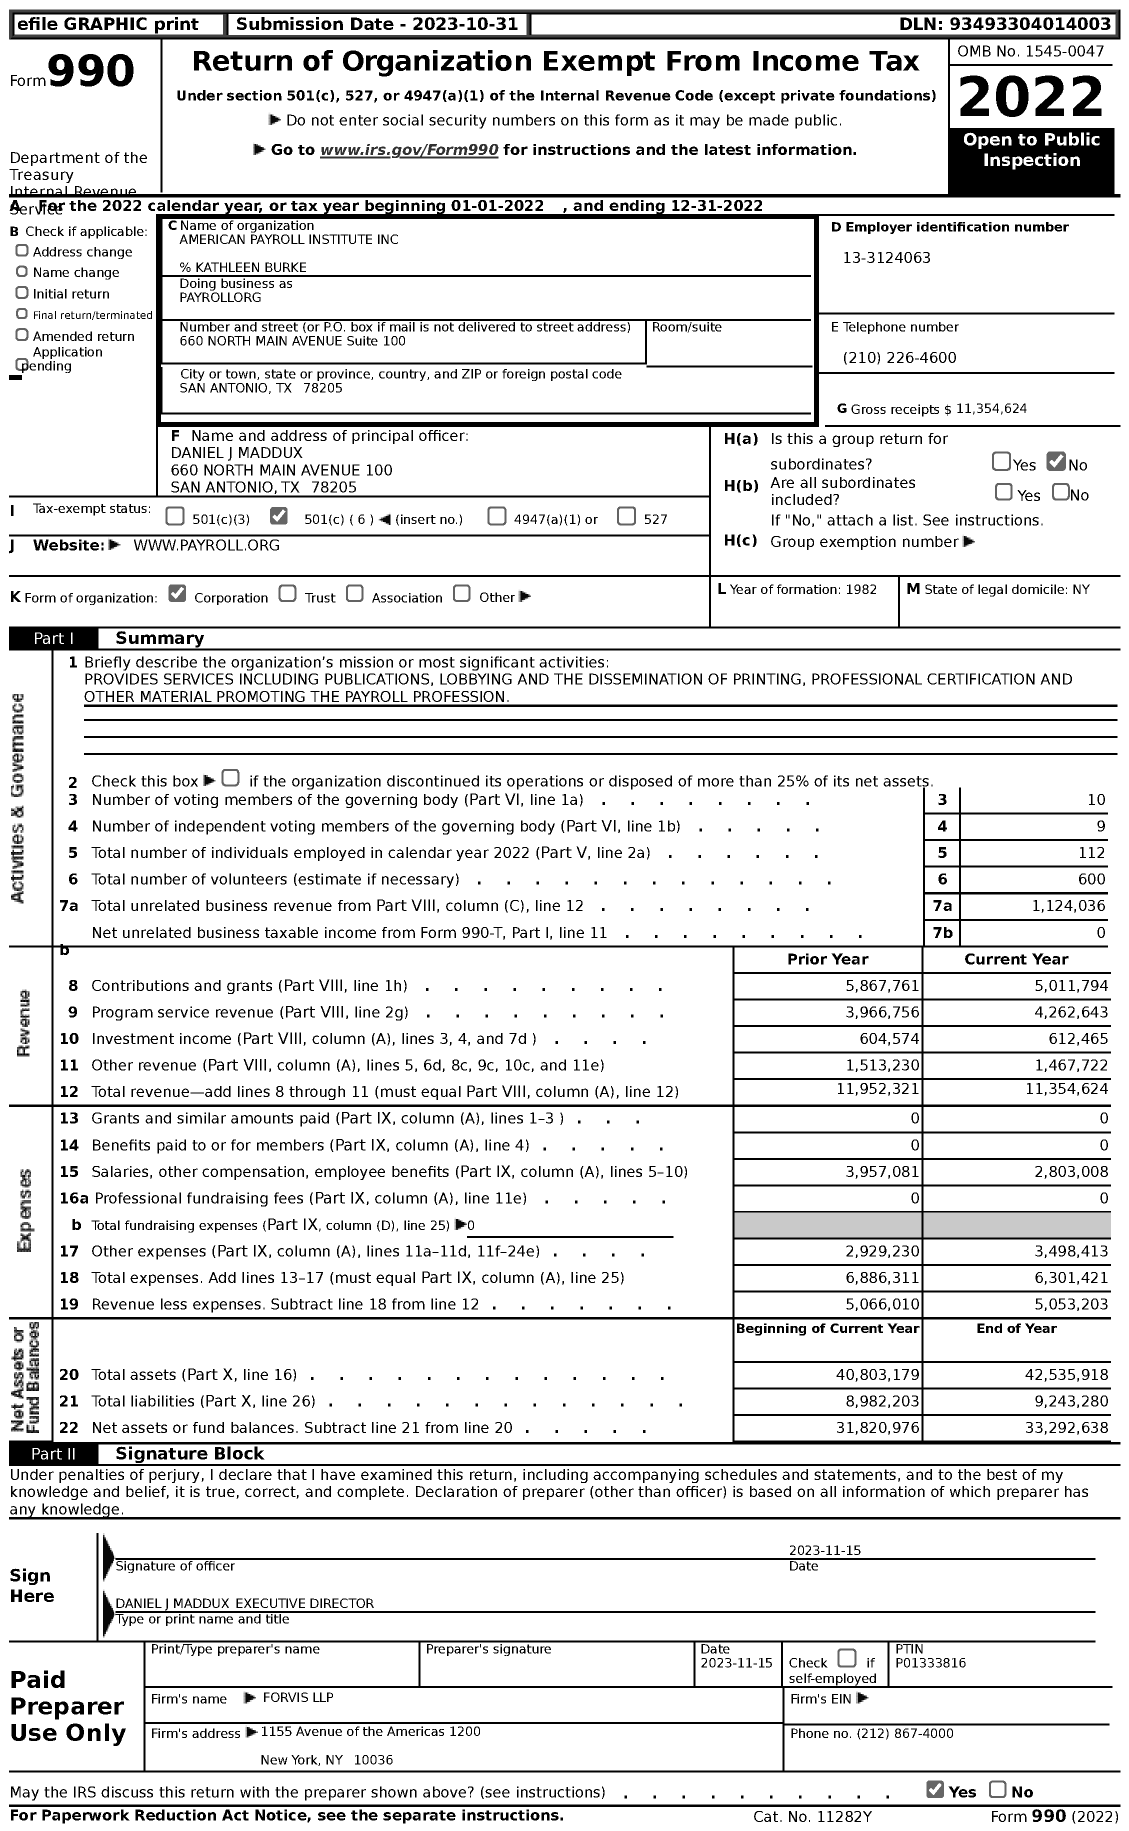 Image of first page of 2022 Form 990 for Payrollorg / American Payroll Institute Inc